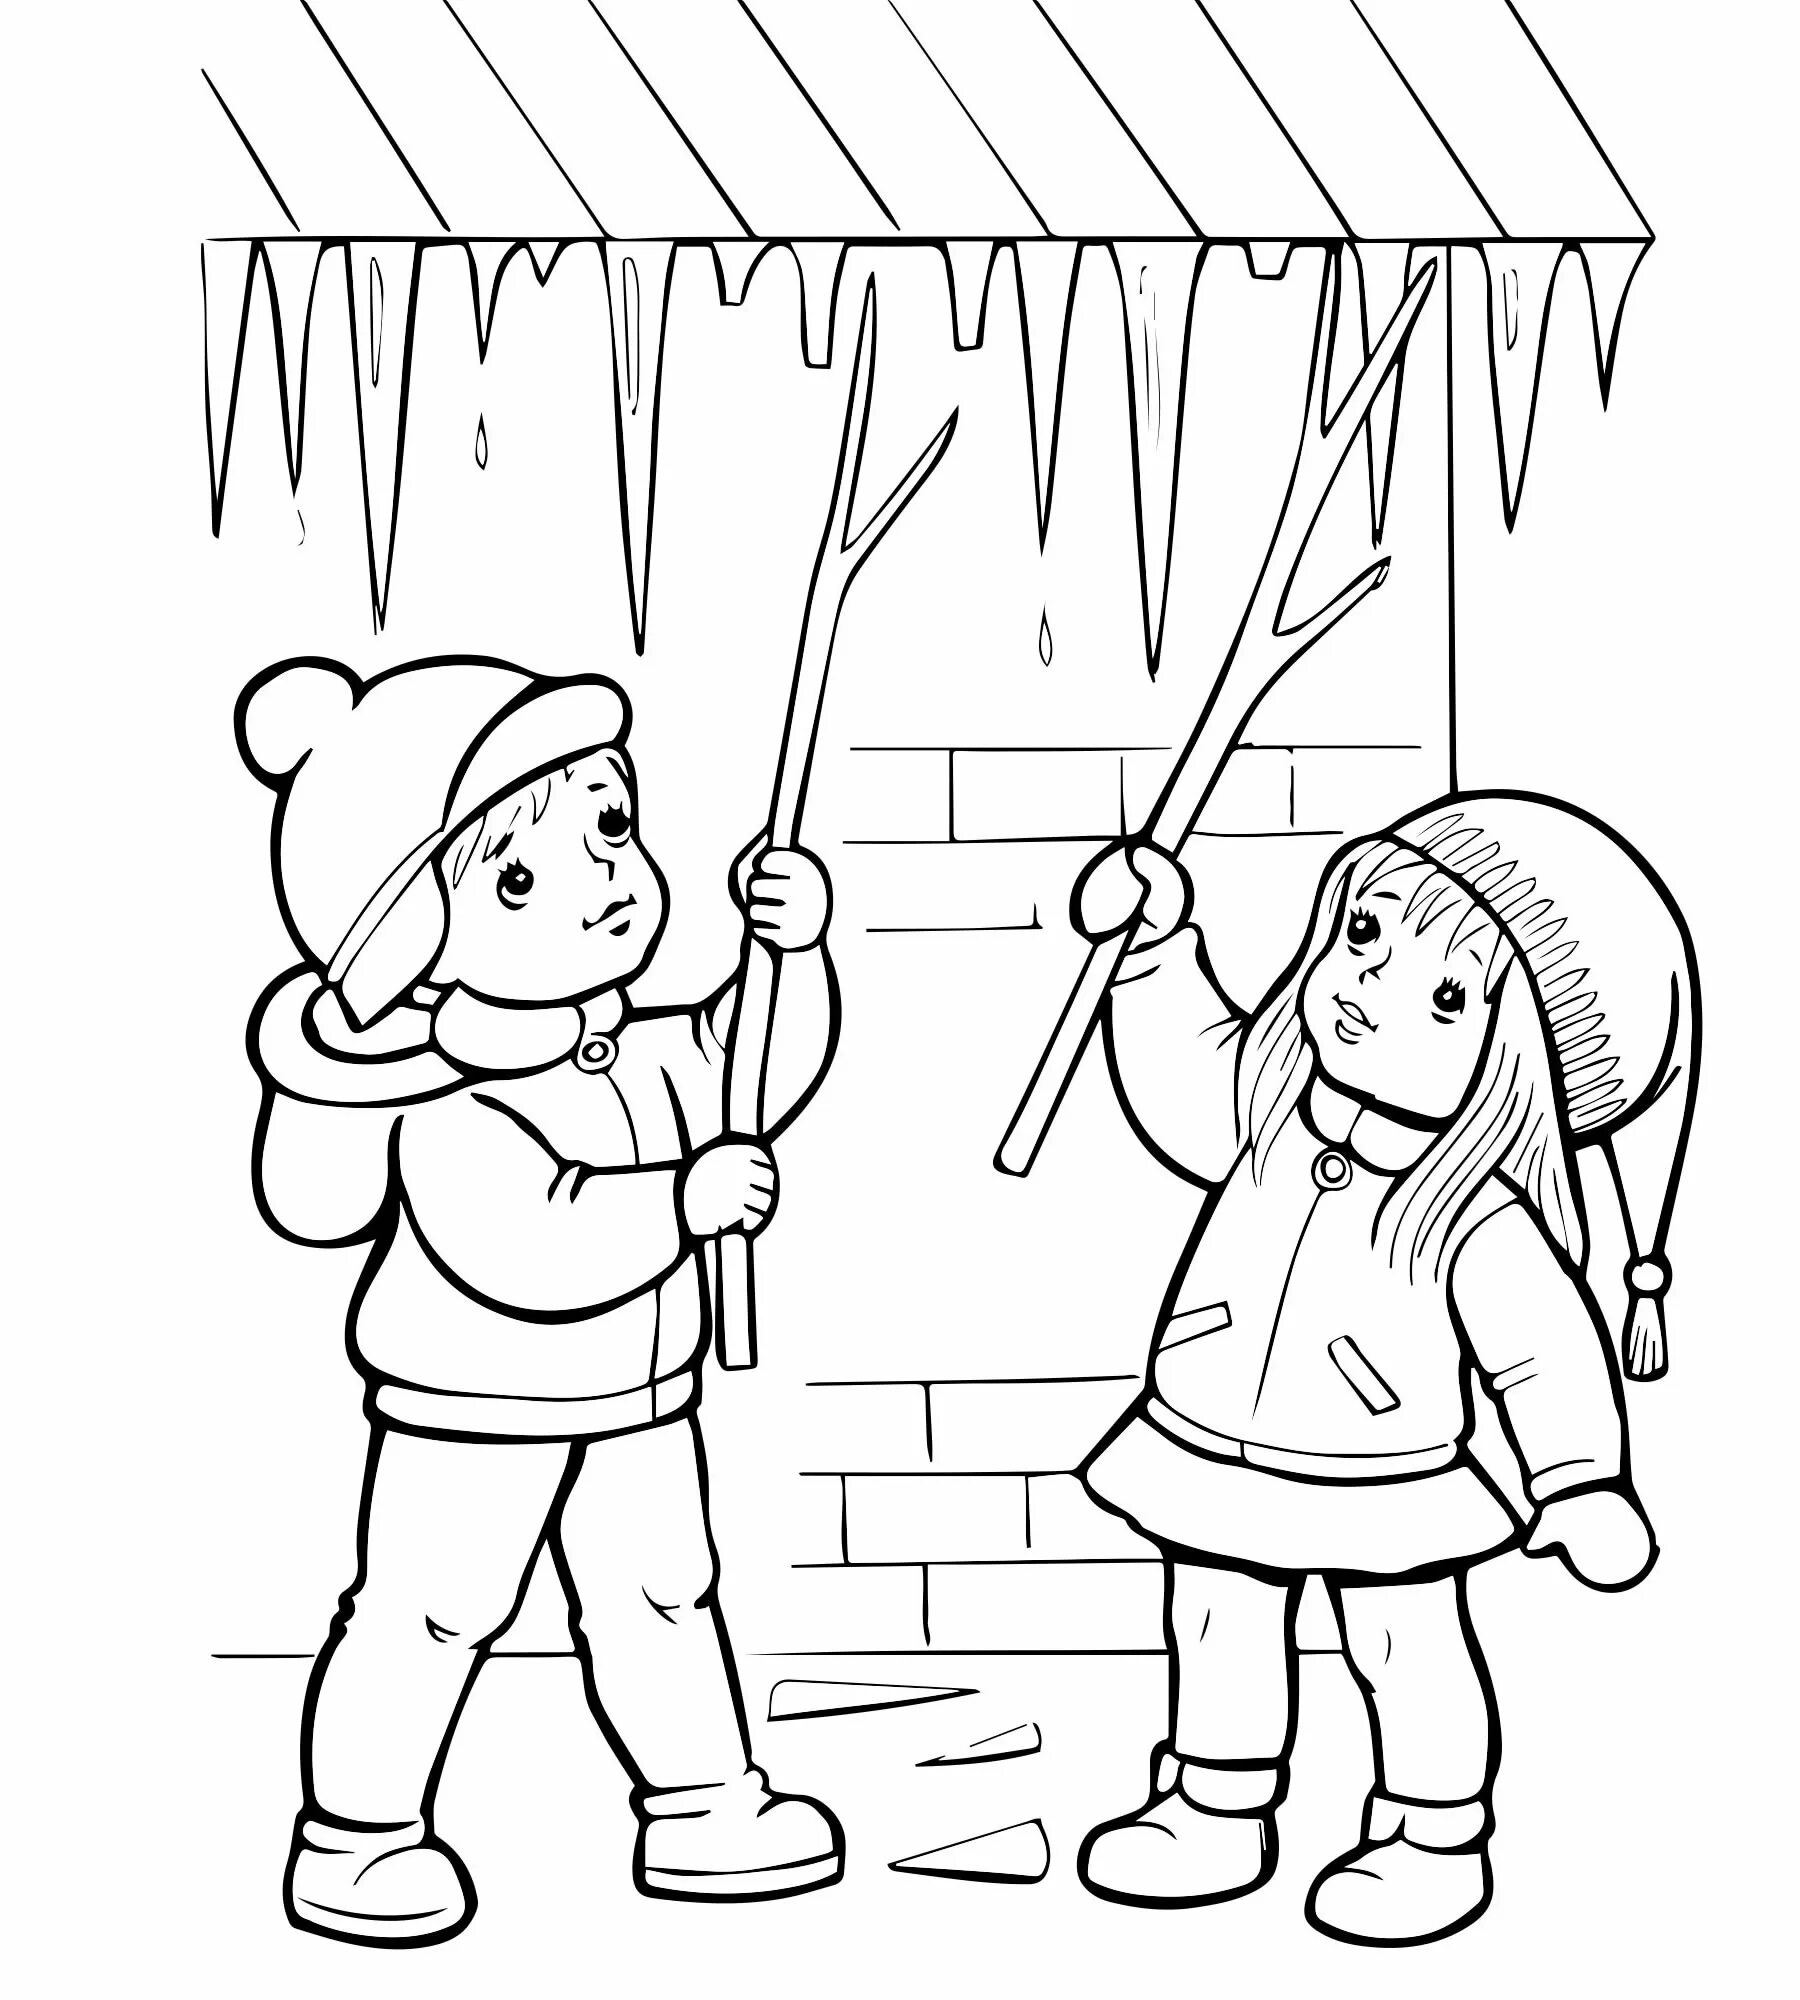 Careful icicles for kids #12